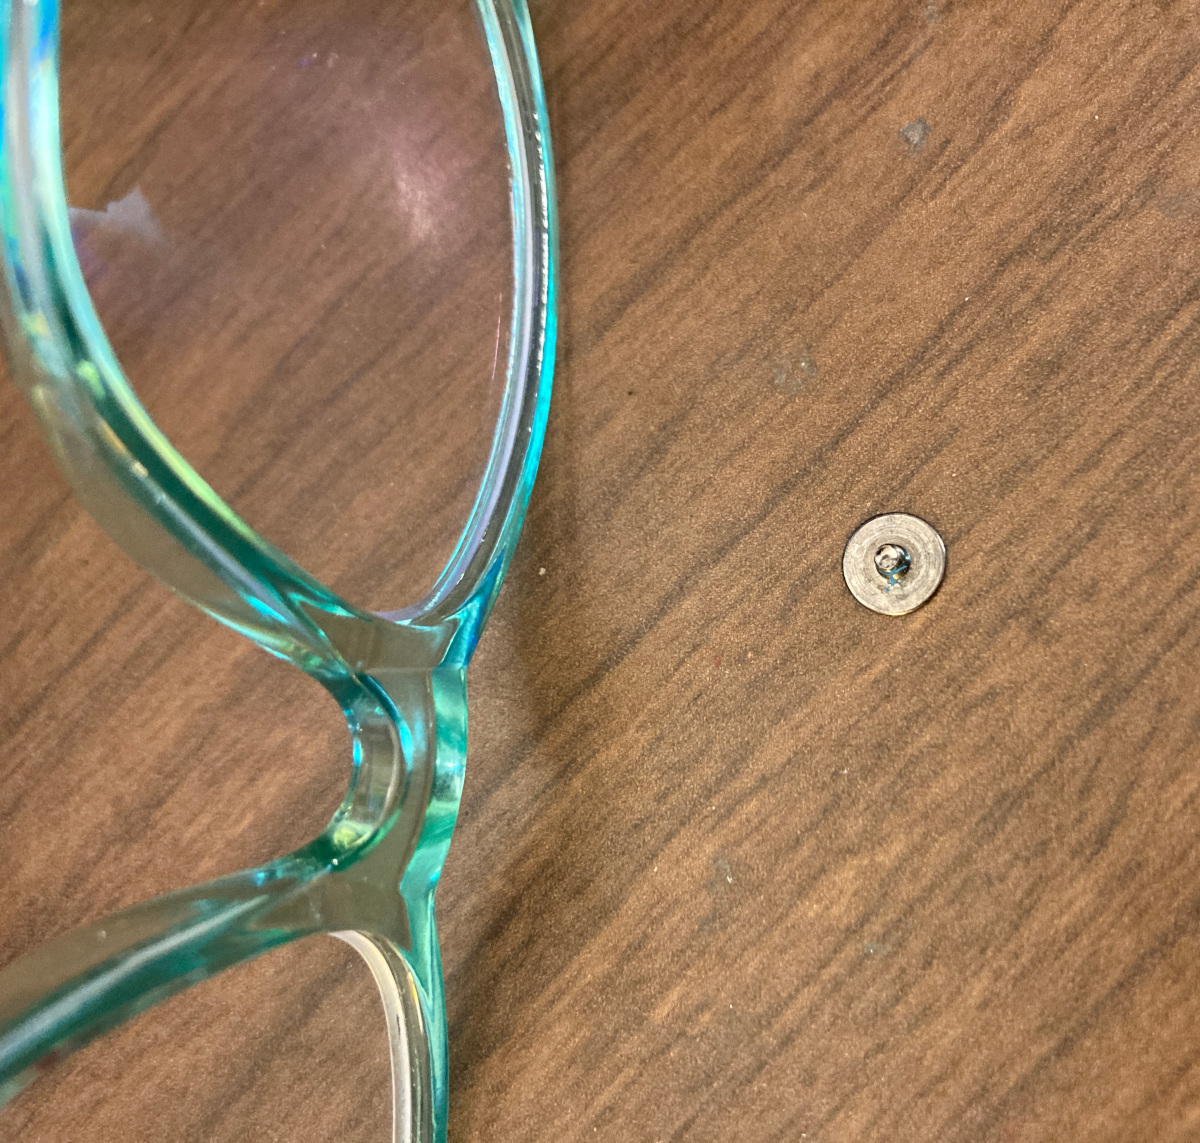 Chromebook write protect screw on desk with glasses for scale